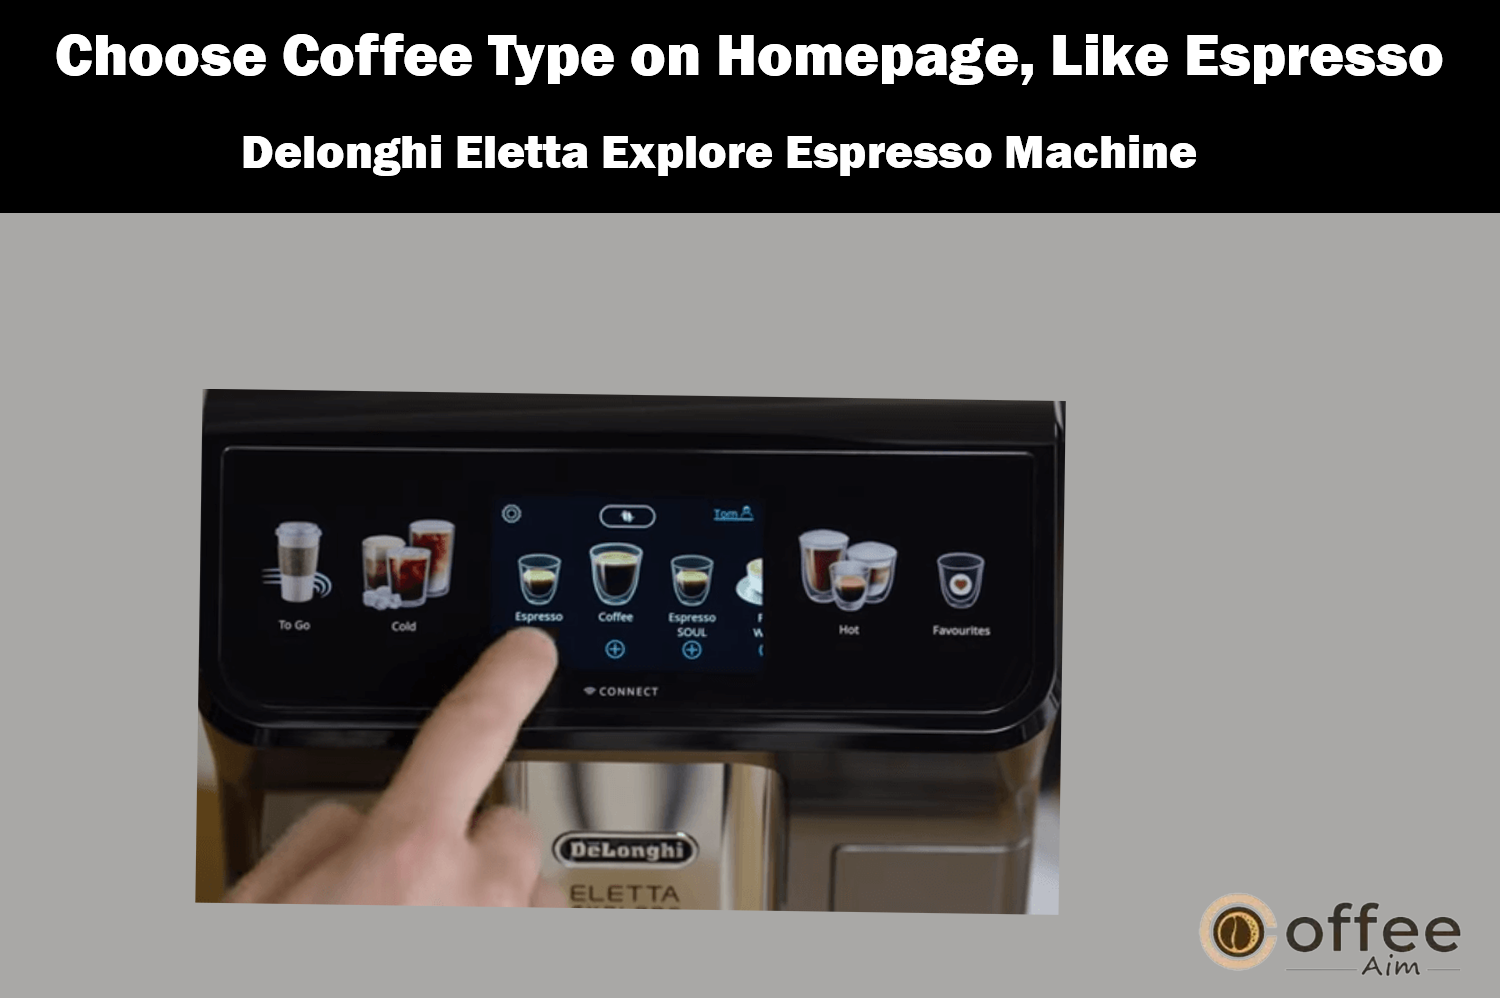 This image illustrates how to select a coffee type, such as Espresso, from the homepage display of the De'Longhi Eletta Explore Espresso Machine, as detailed in the article 'How to Use the De'Longhi Eletta Explore Espresso Machine'.